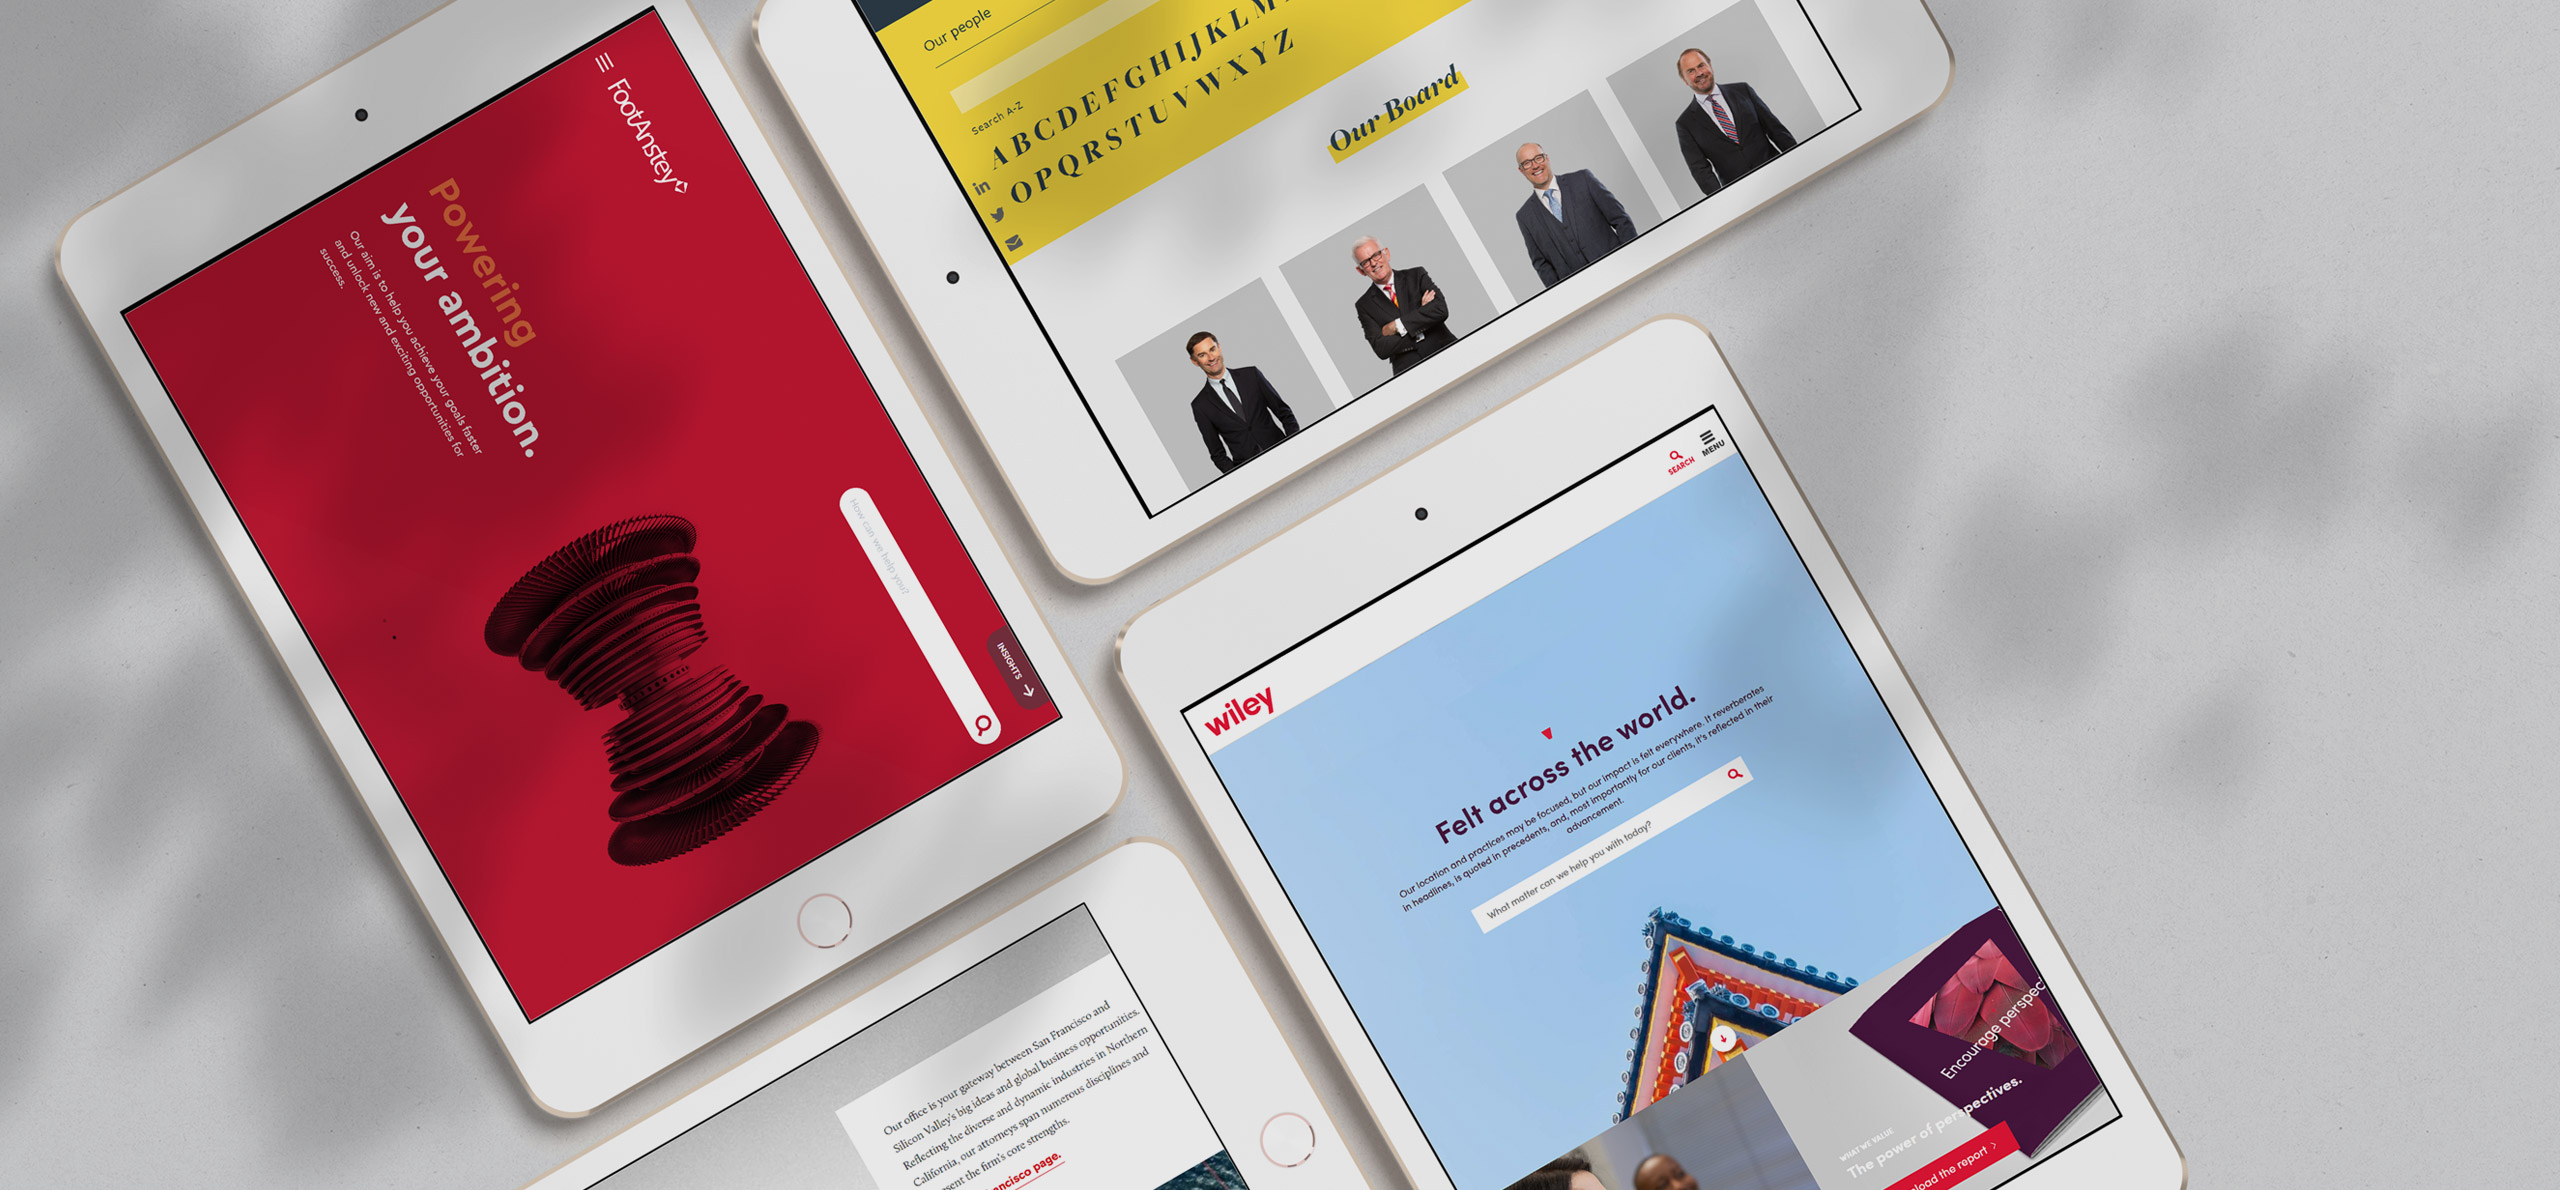 The most creative law firm websites 2020